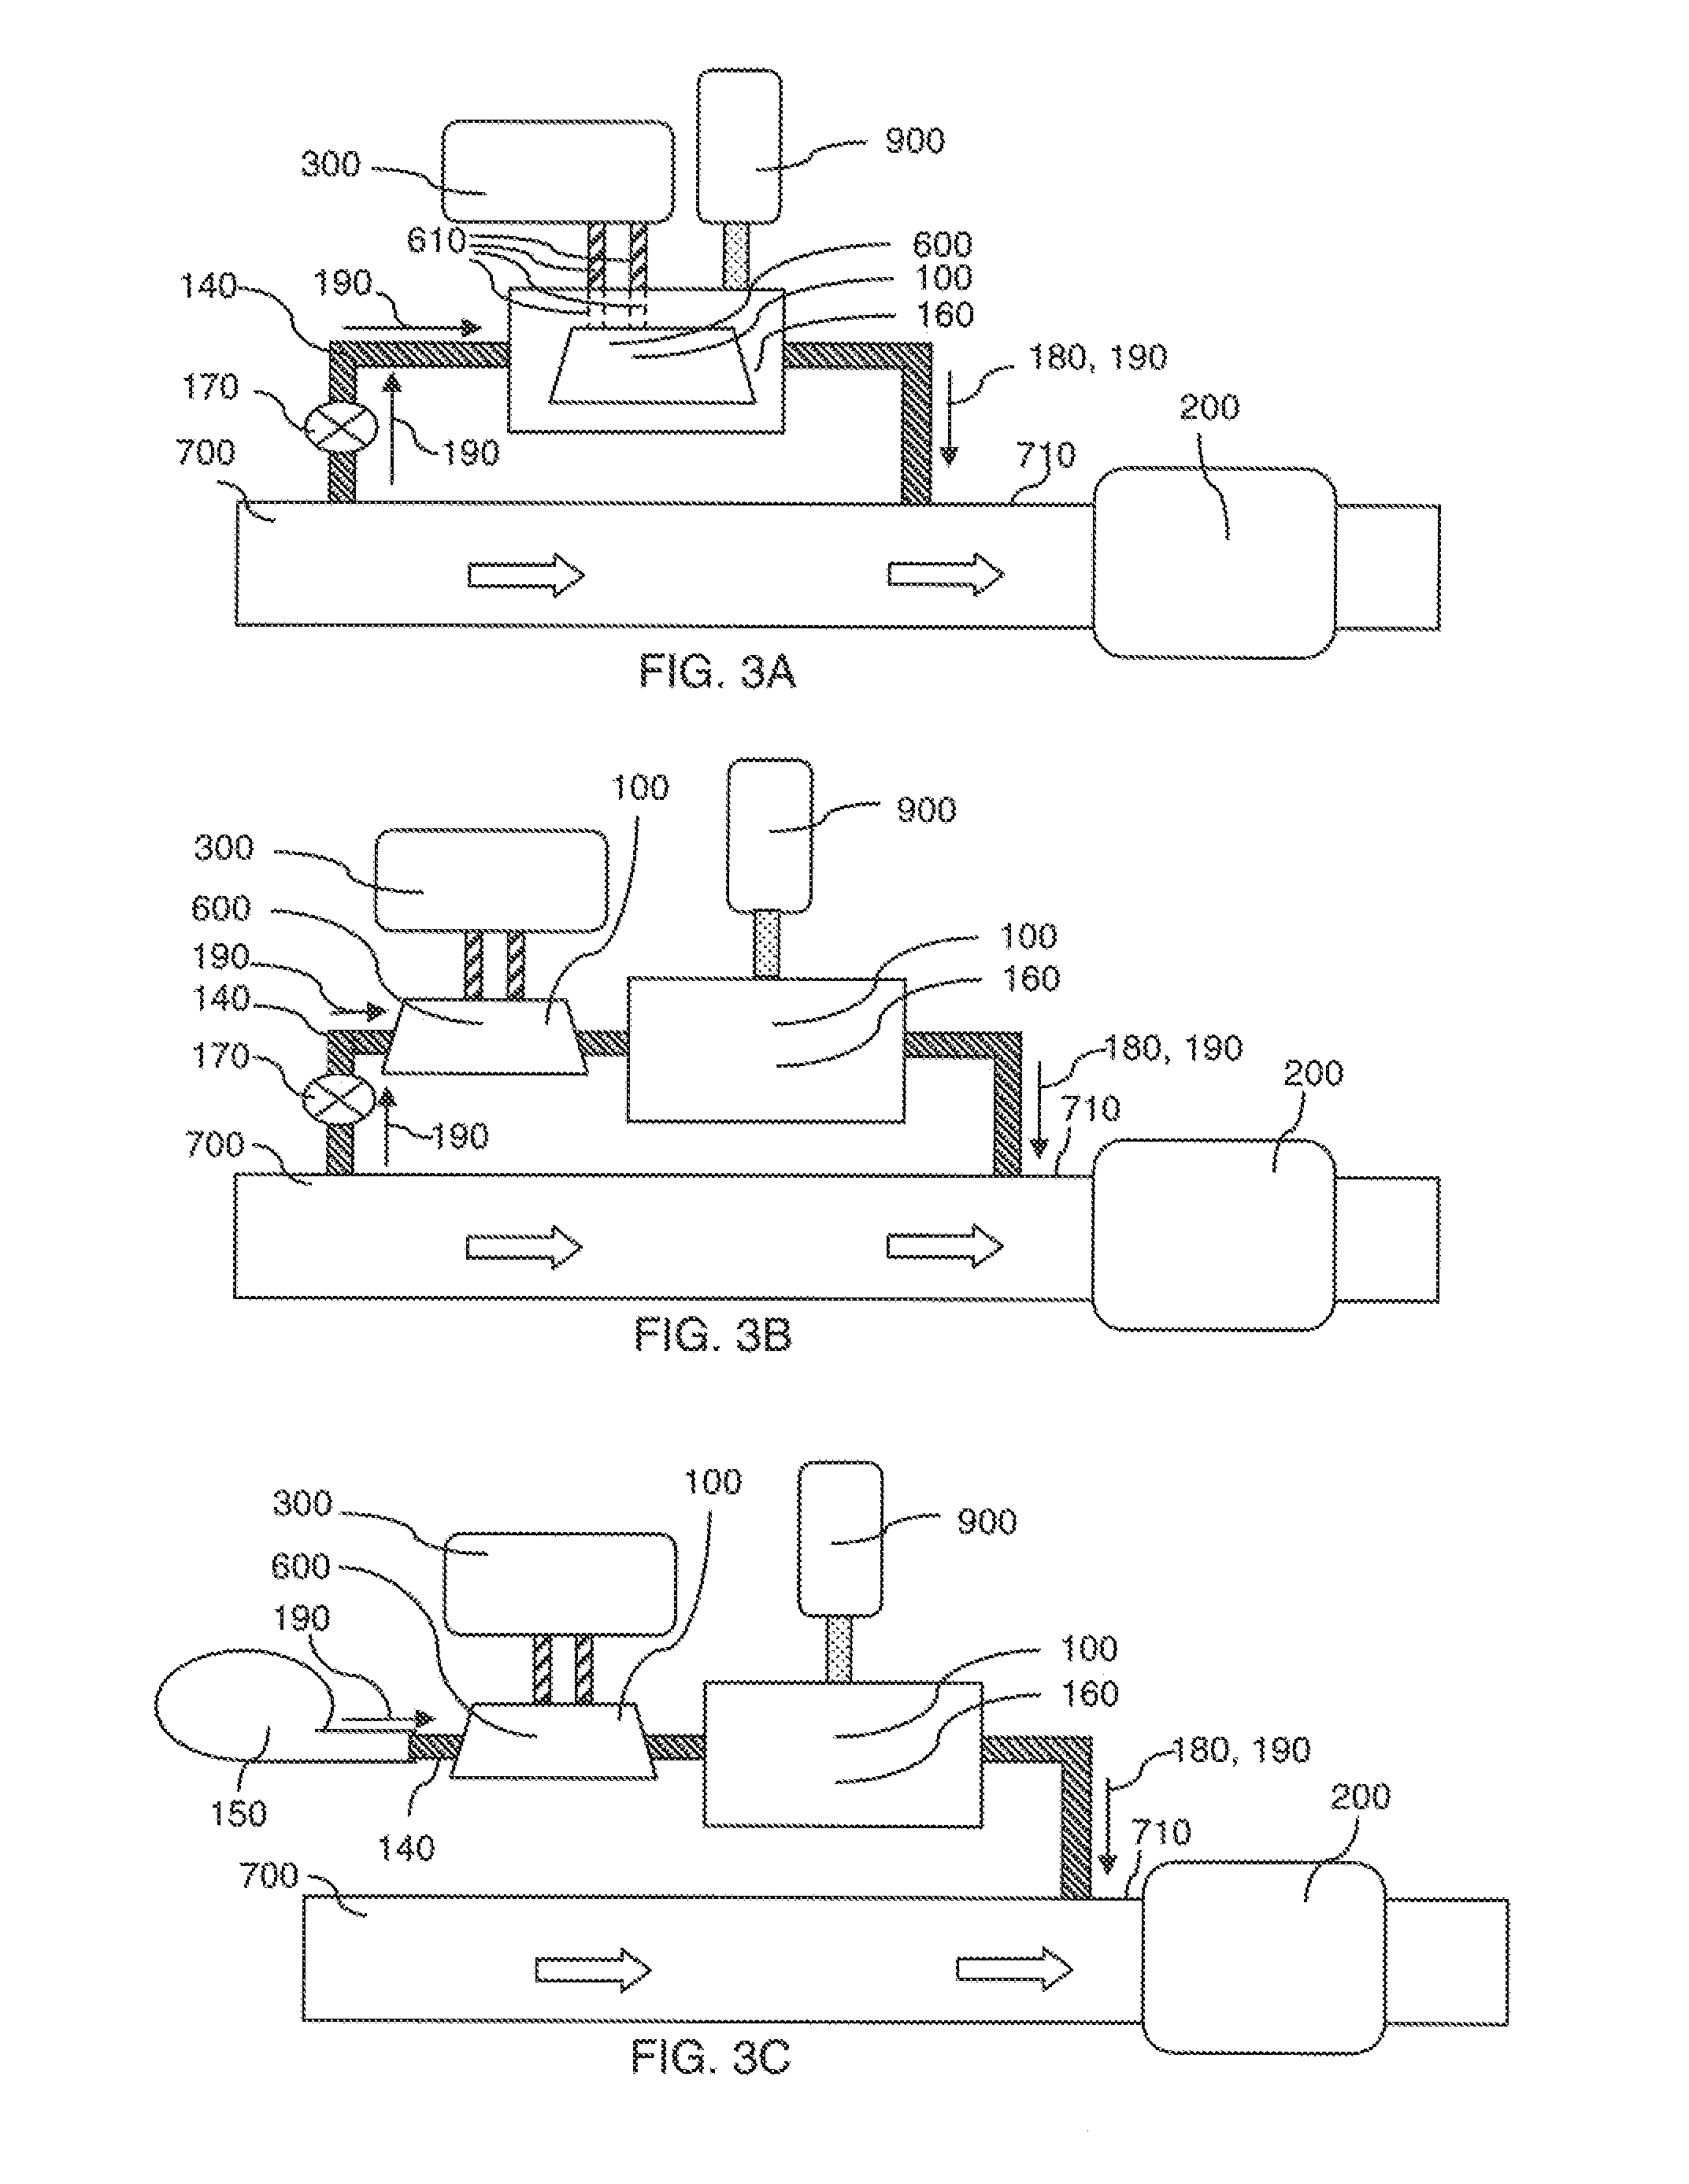 Method and devices for heating urea-containing materials in vehicle emission control system